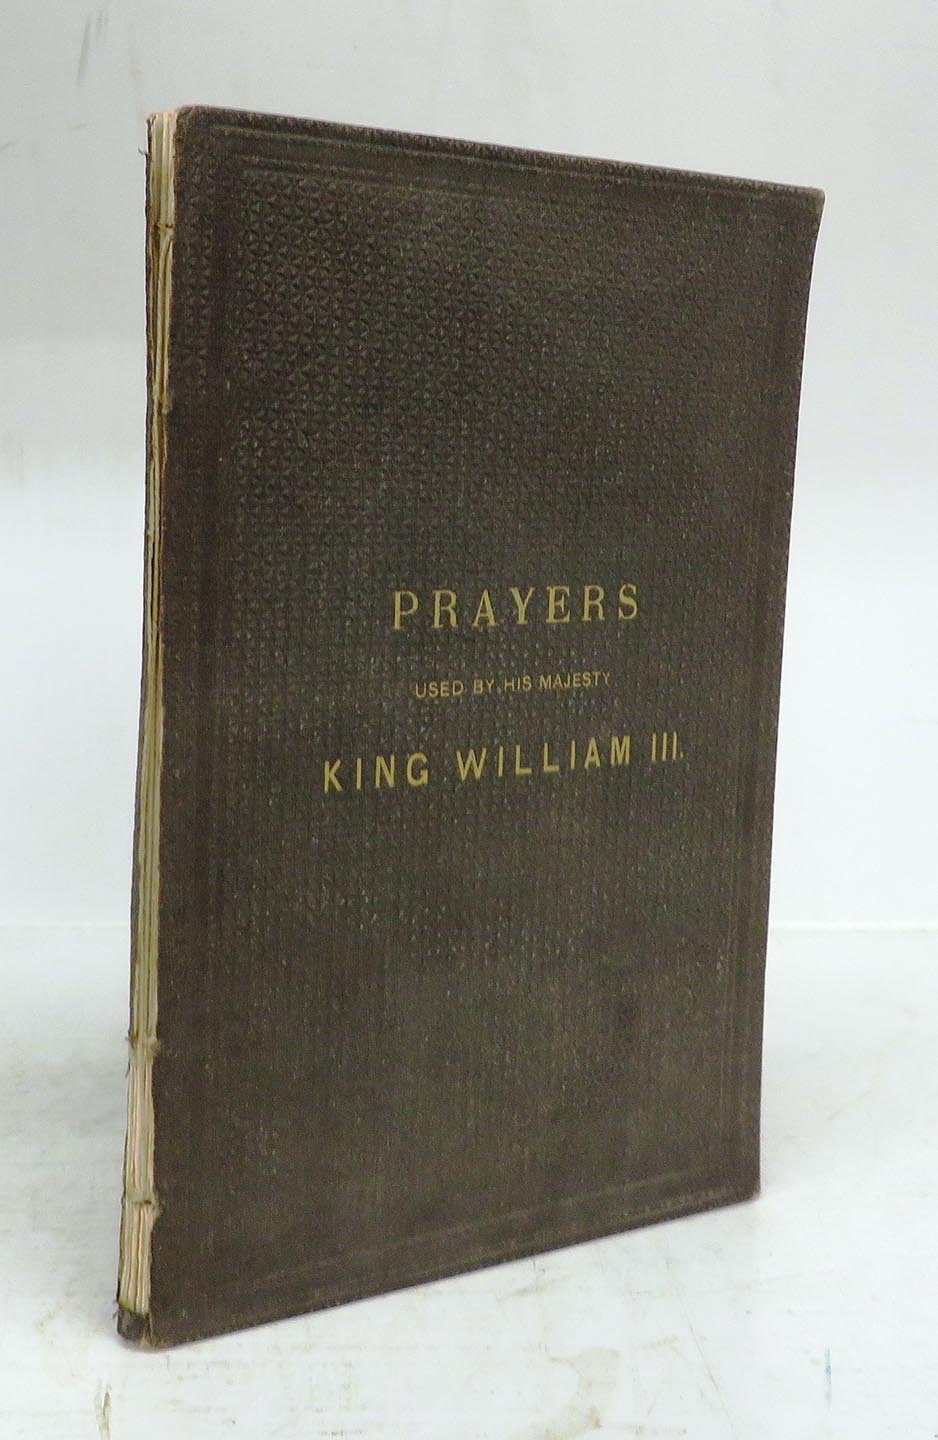 A Form of Prayers used by his Majesty King William III when he Received the Holy Sacrament, and on Other Occasions